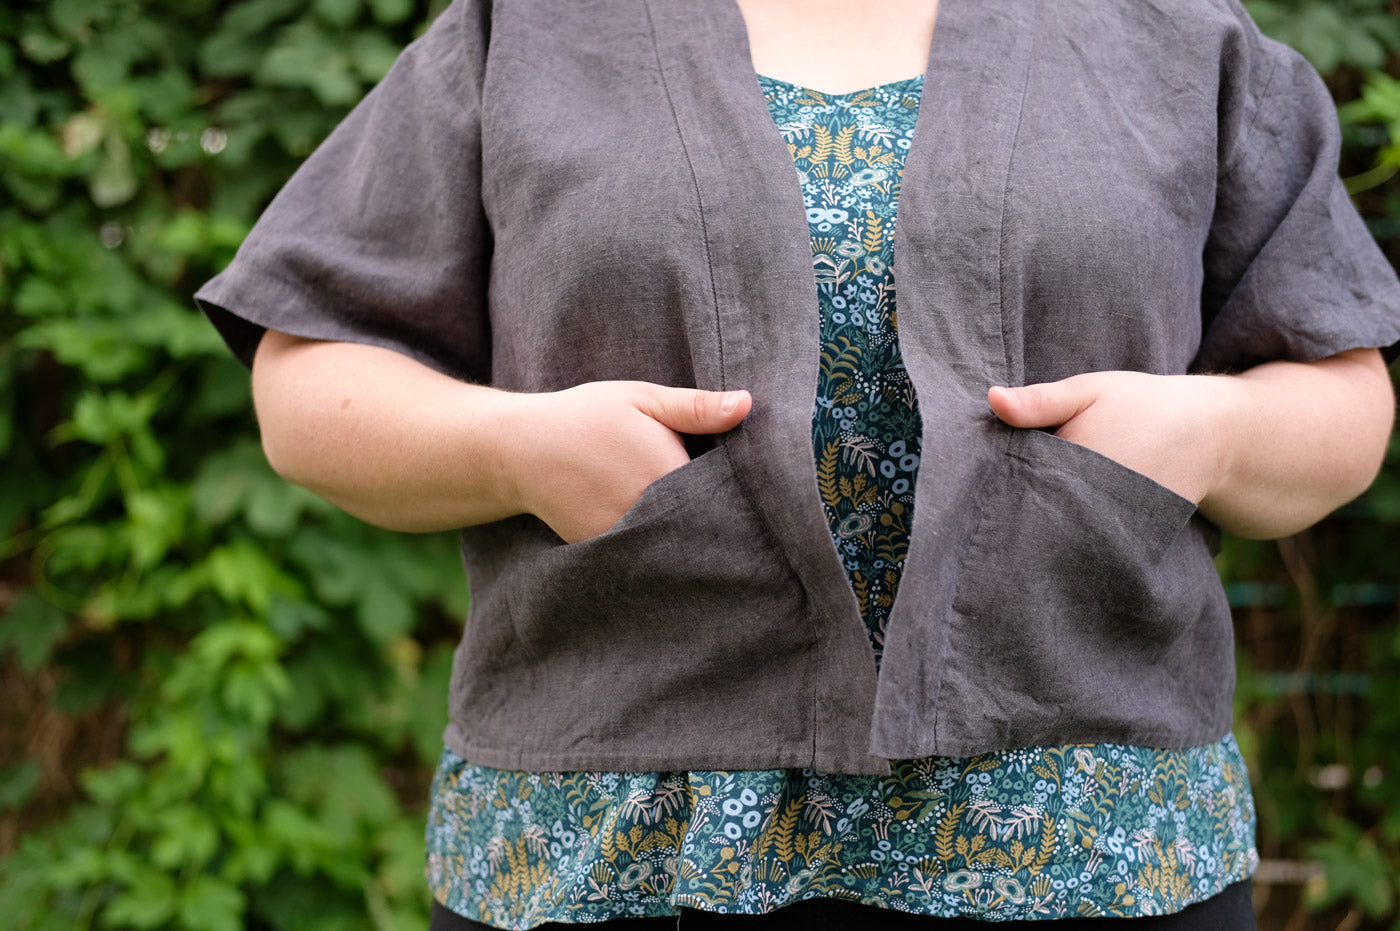 Hoshi Jacket by Amber Corcoran and Ogden Cami by True Bias